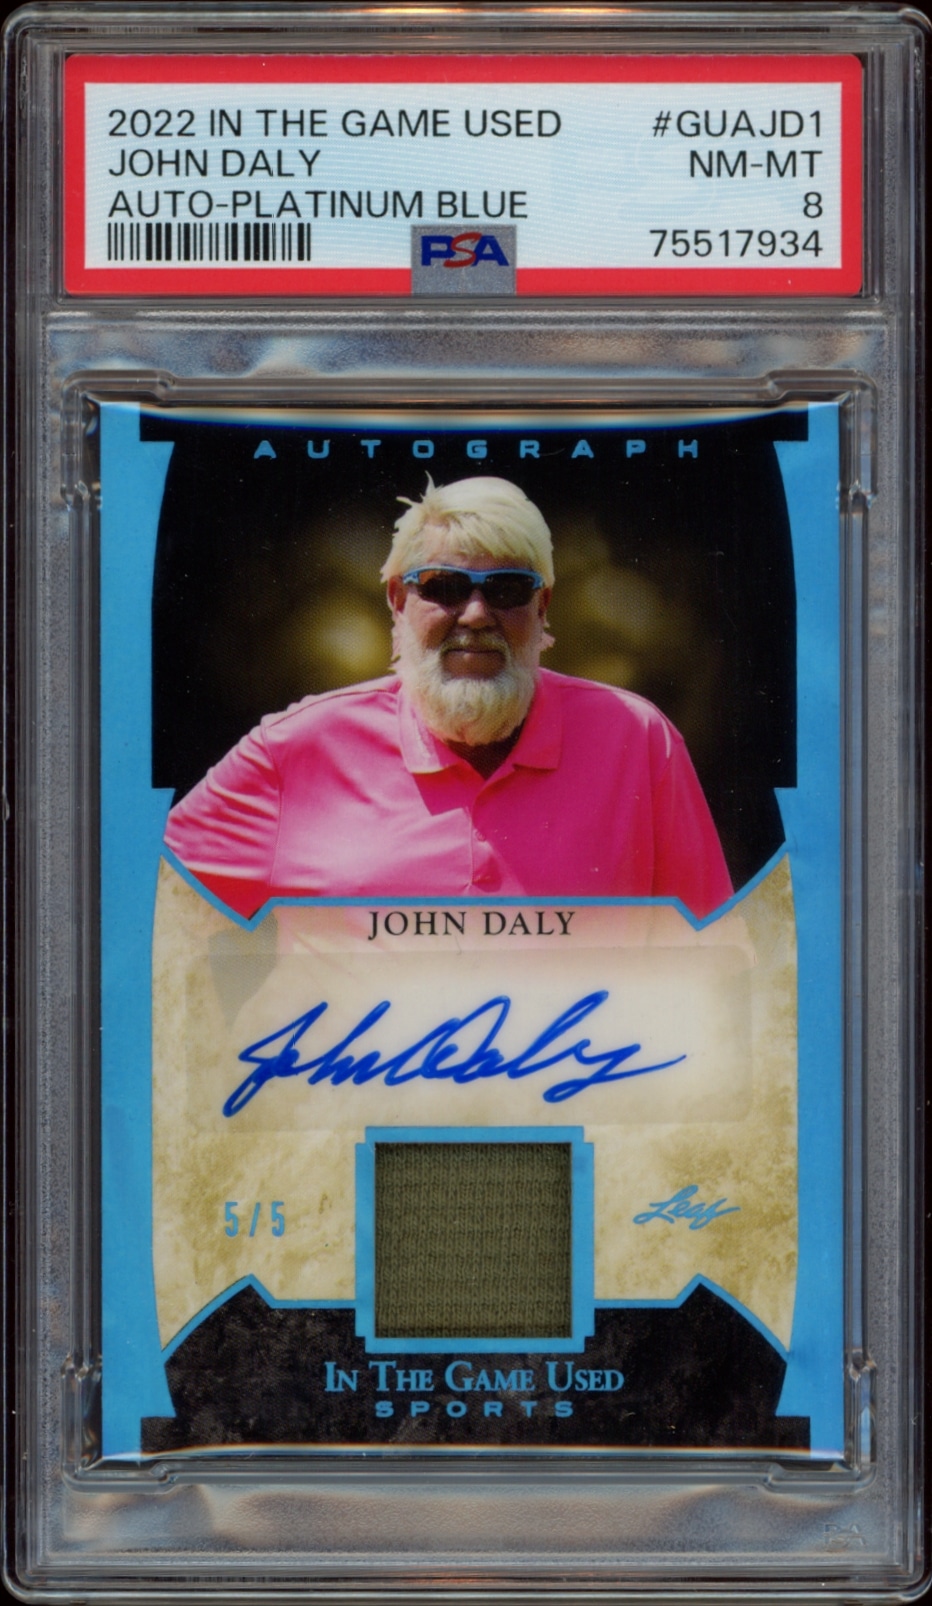 John Daly 2022 trading card with autograph and memorabilia, rated PSA 8.